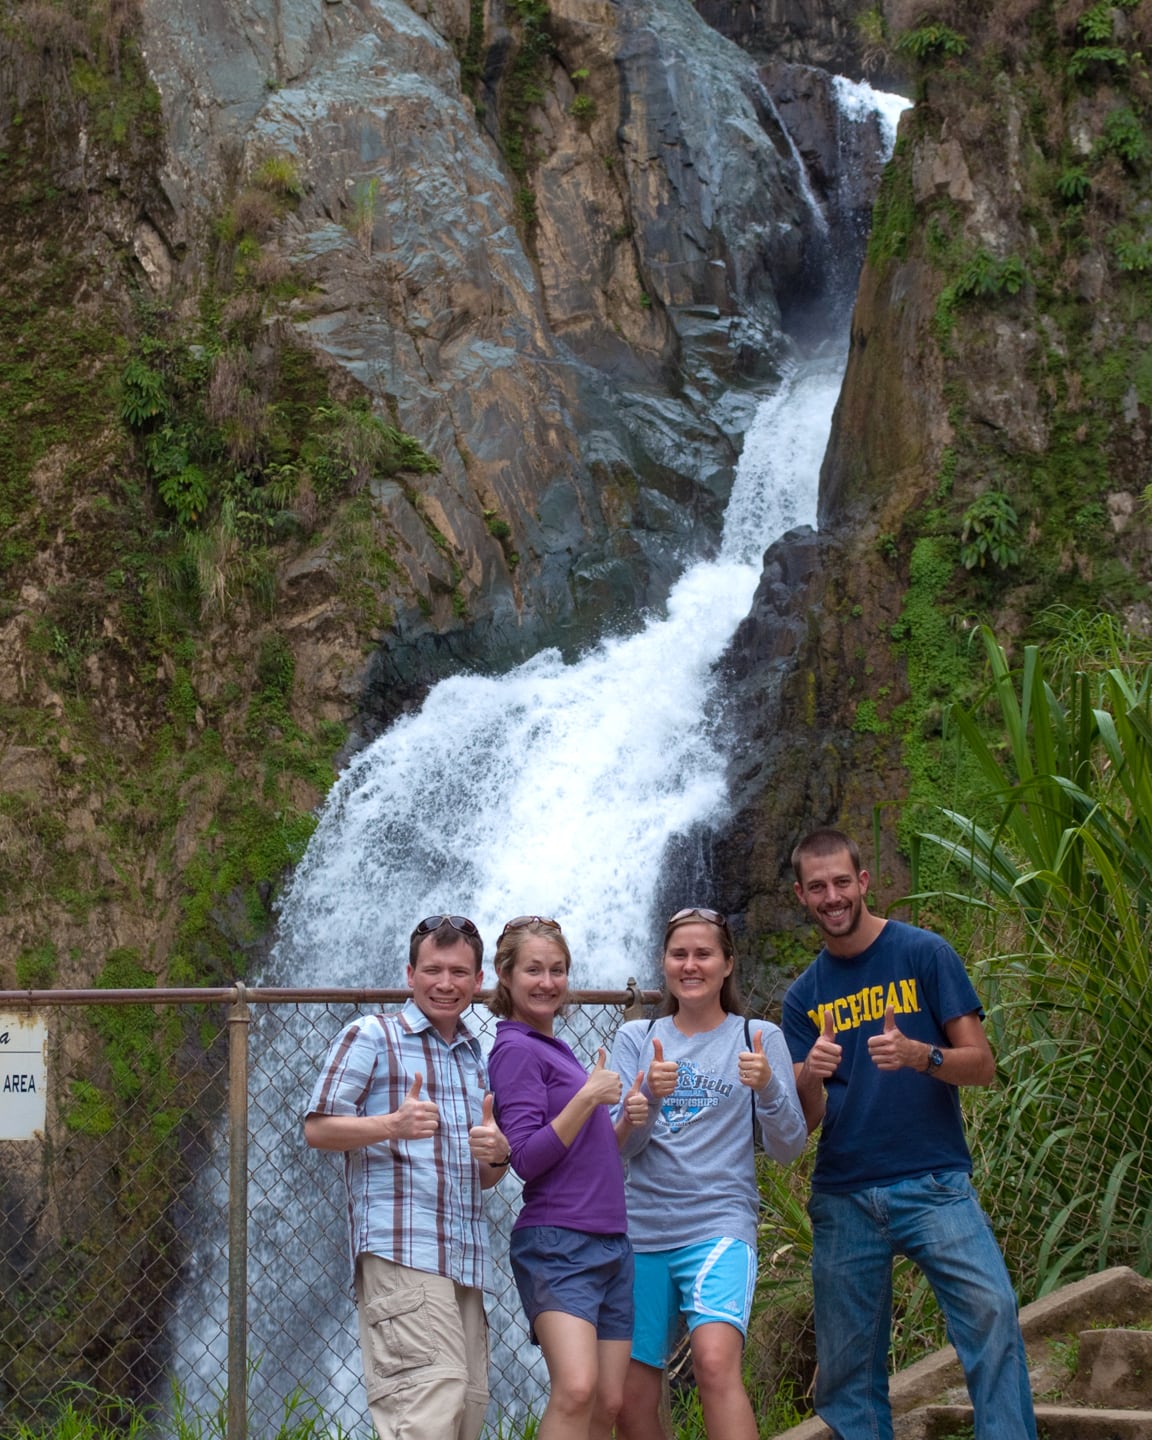 hikers standing in front of waterfall giving thumbs up